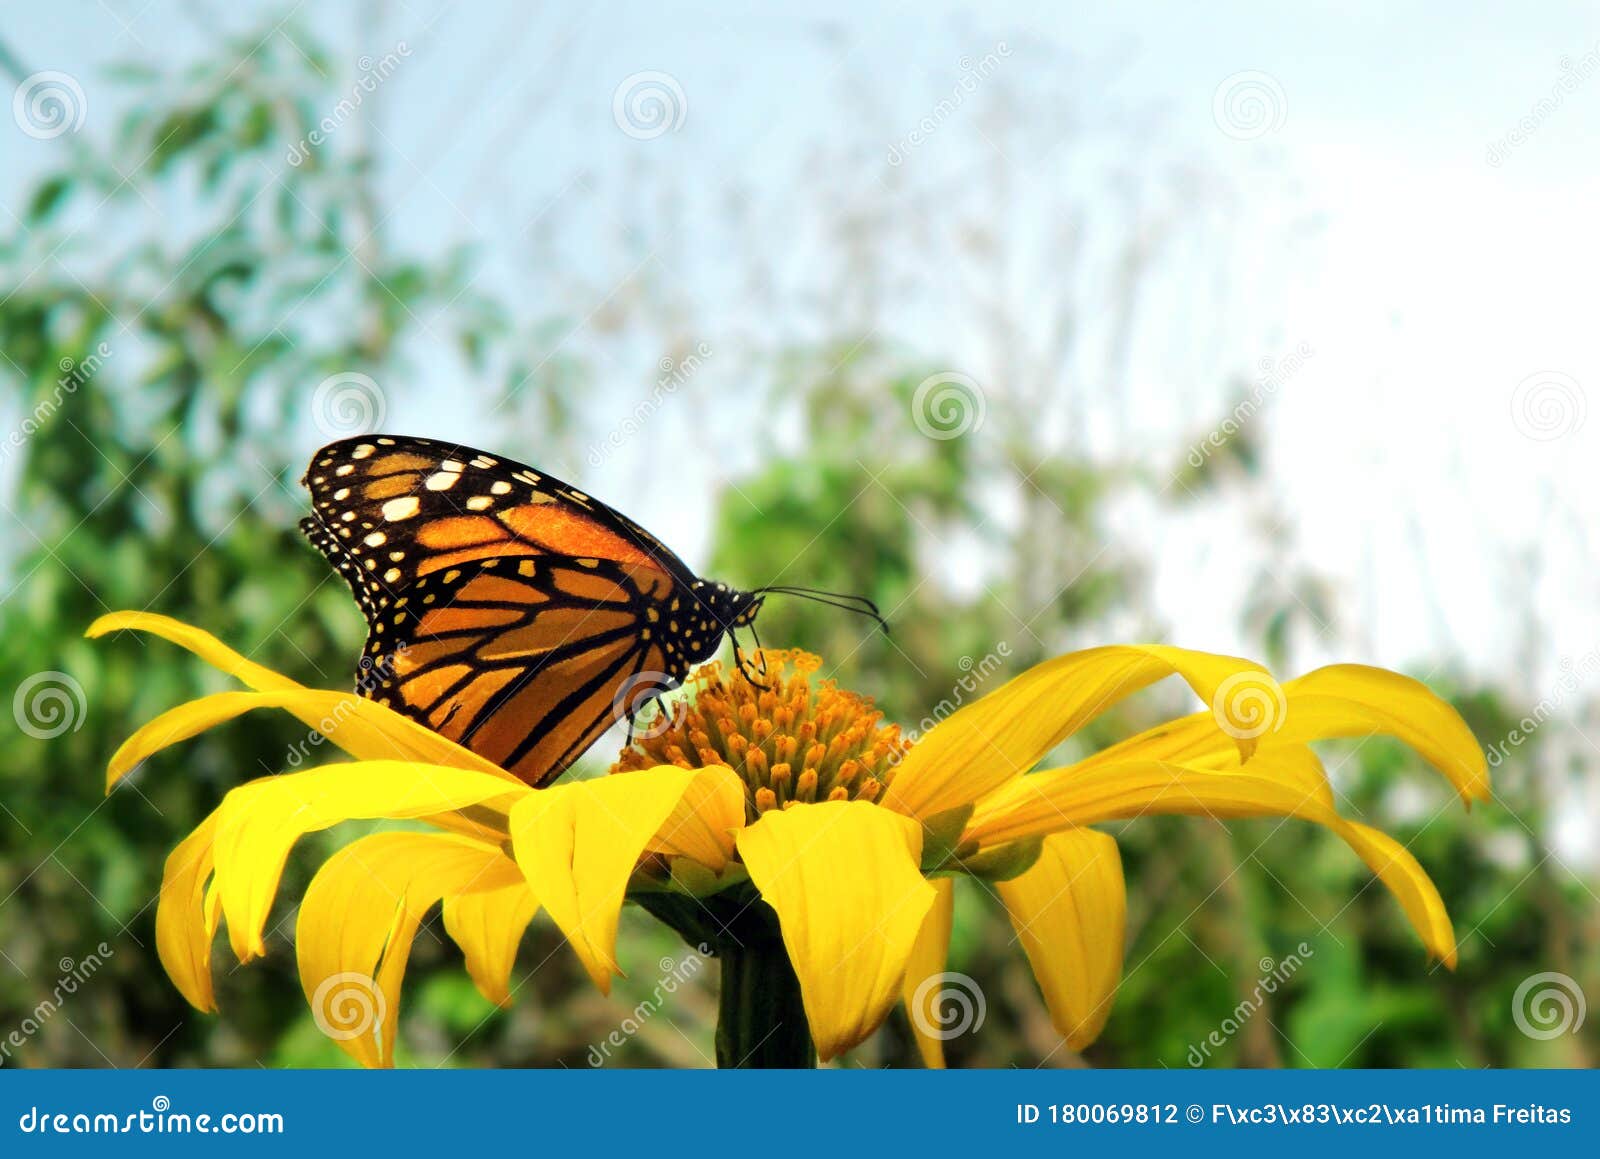 perfil monarch butterfly on top of a yellow flower